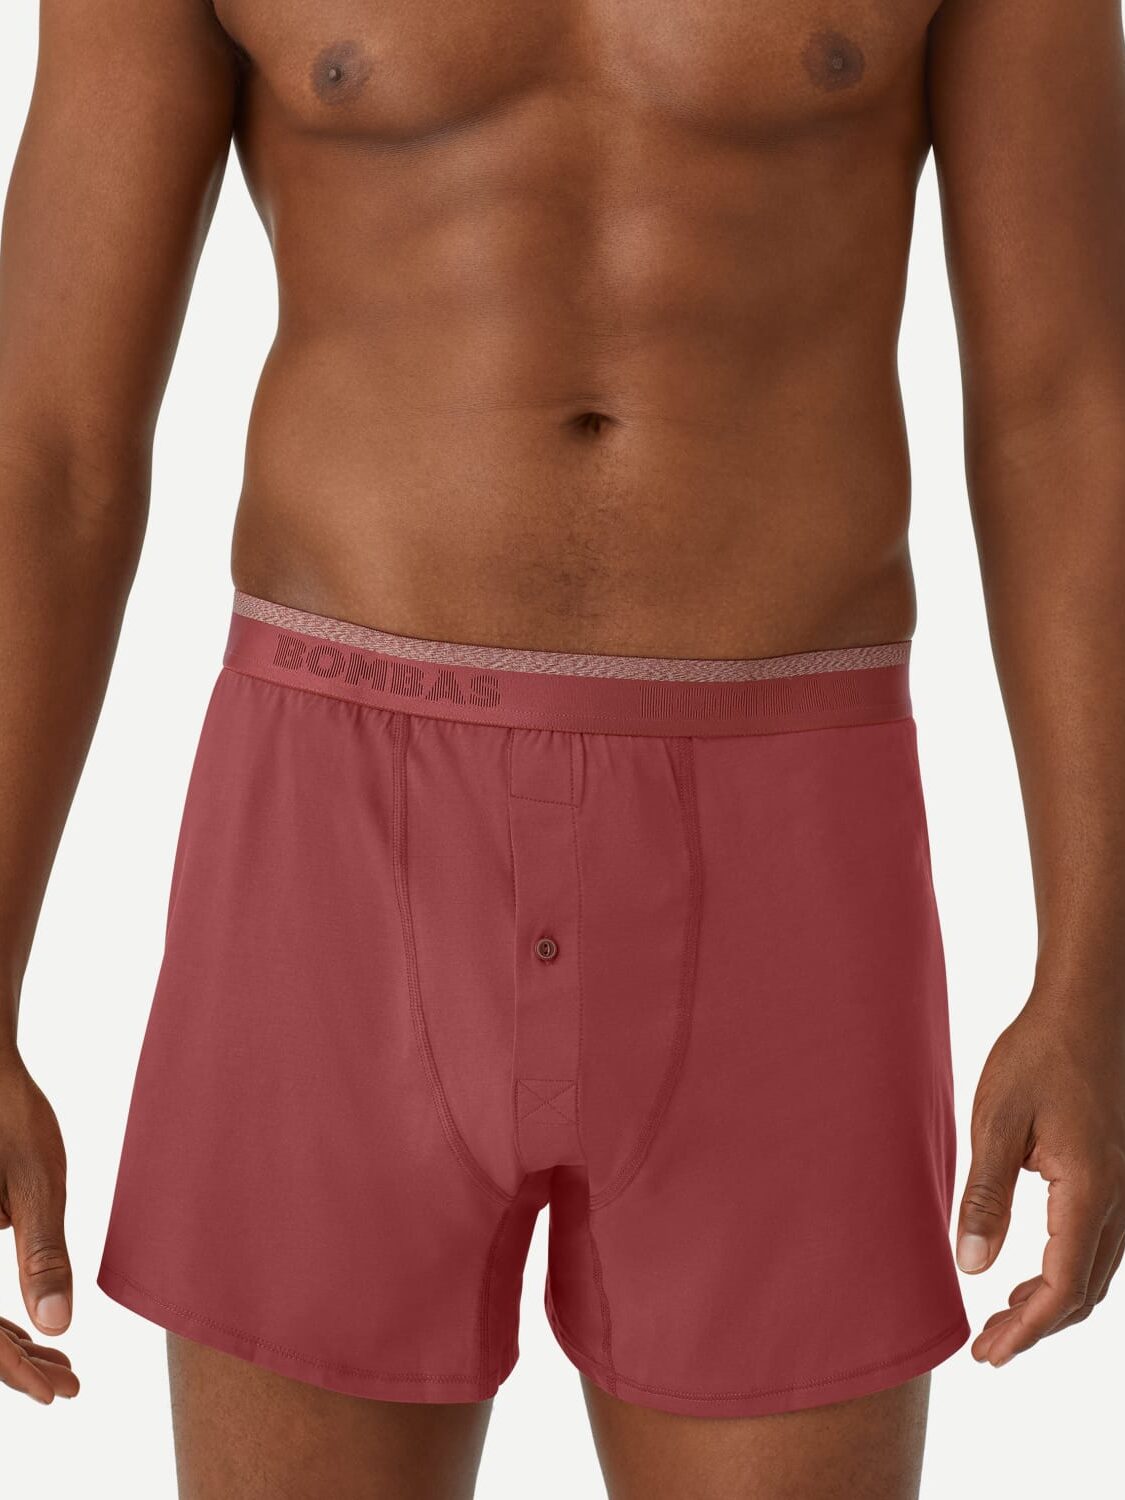 A person wearing red Bombas boxer shorts with a grey waistband is standing against a plain white background. The shorts have a button fly.